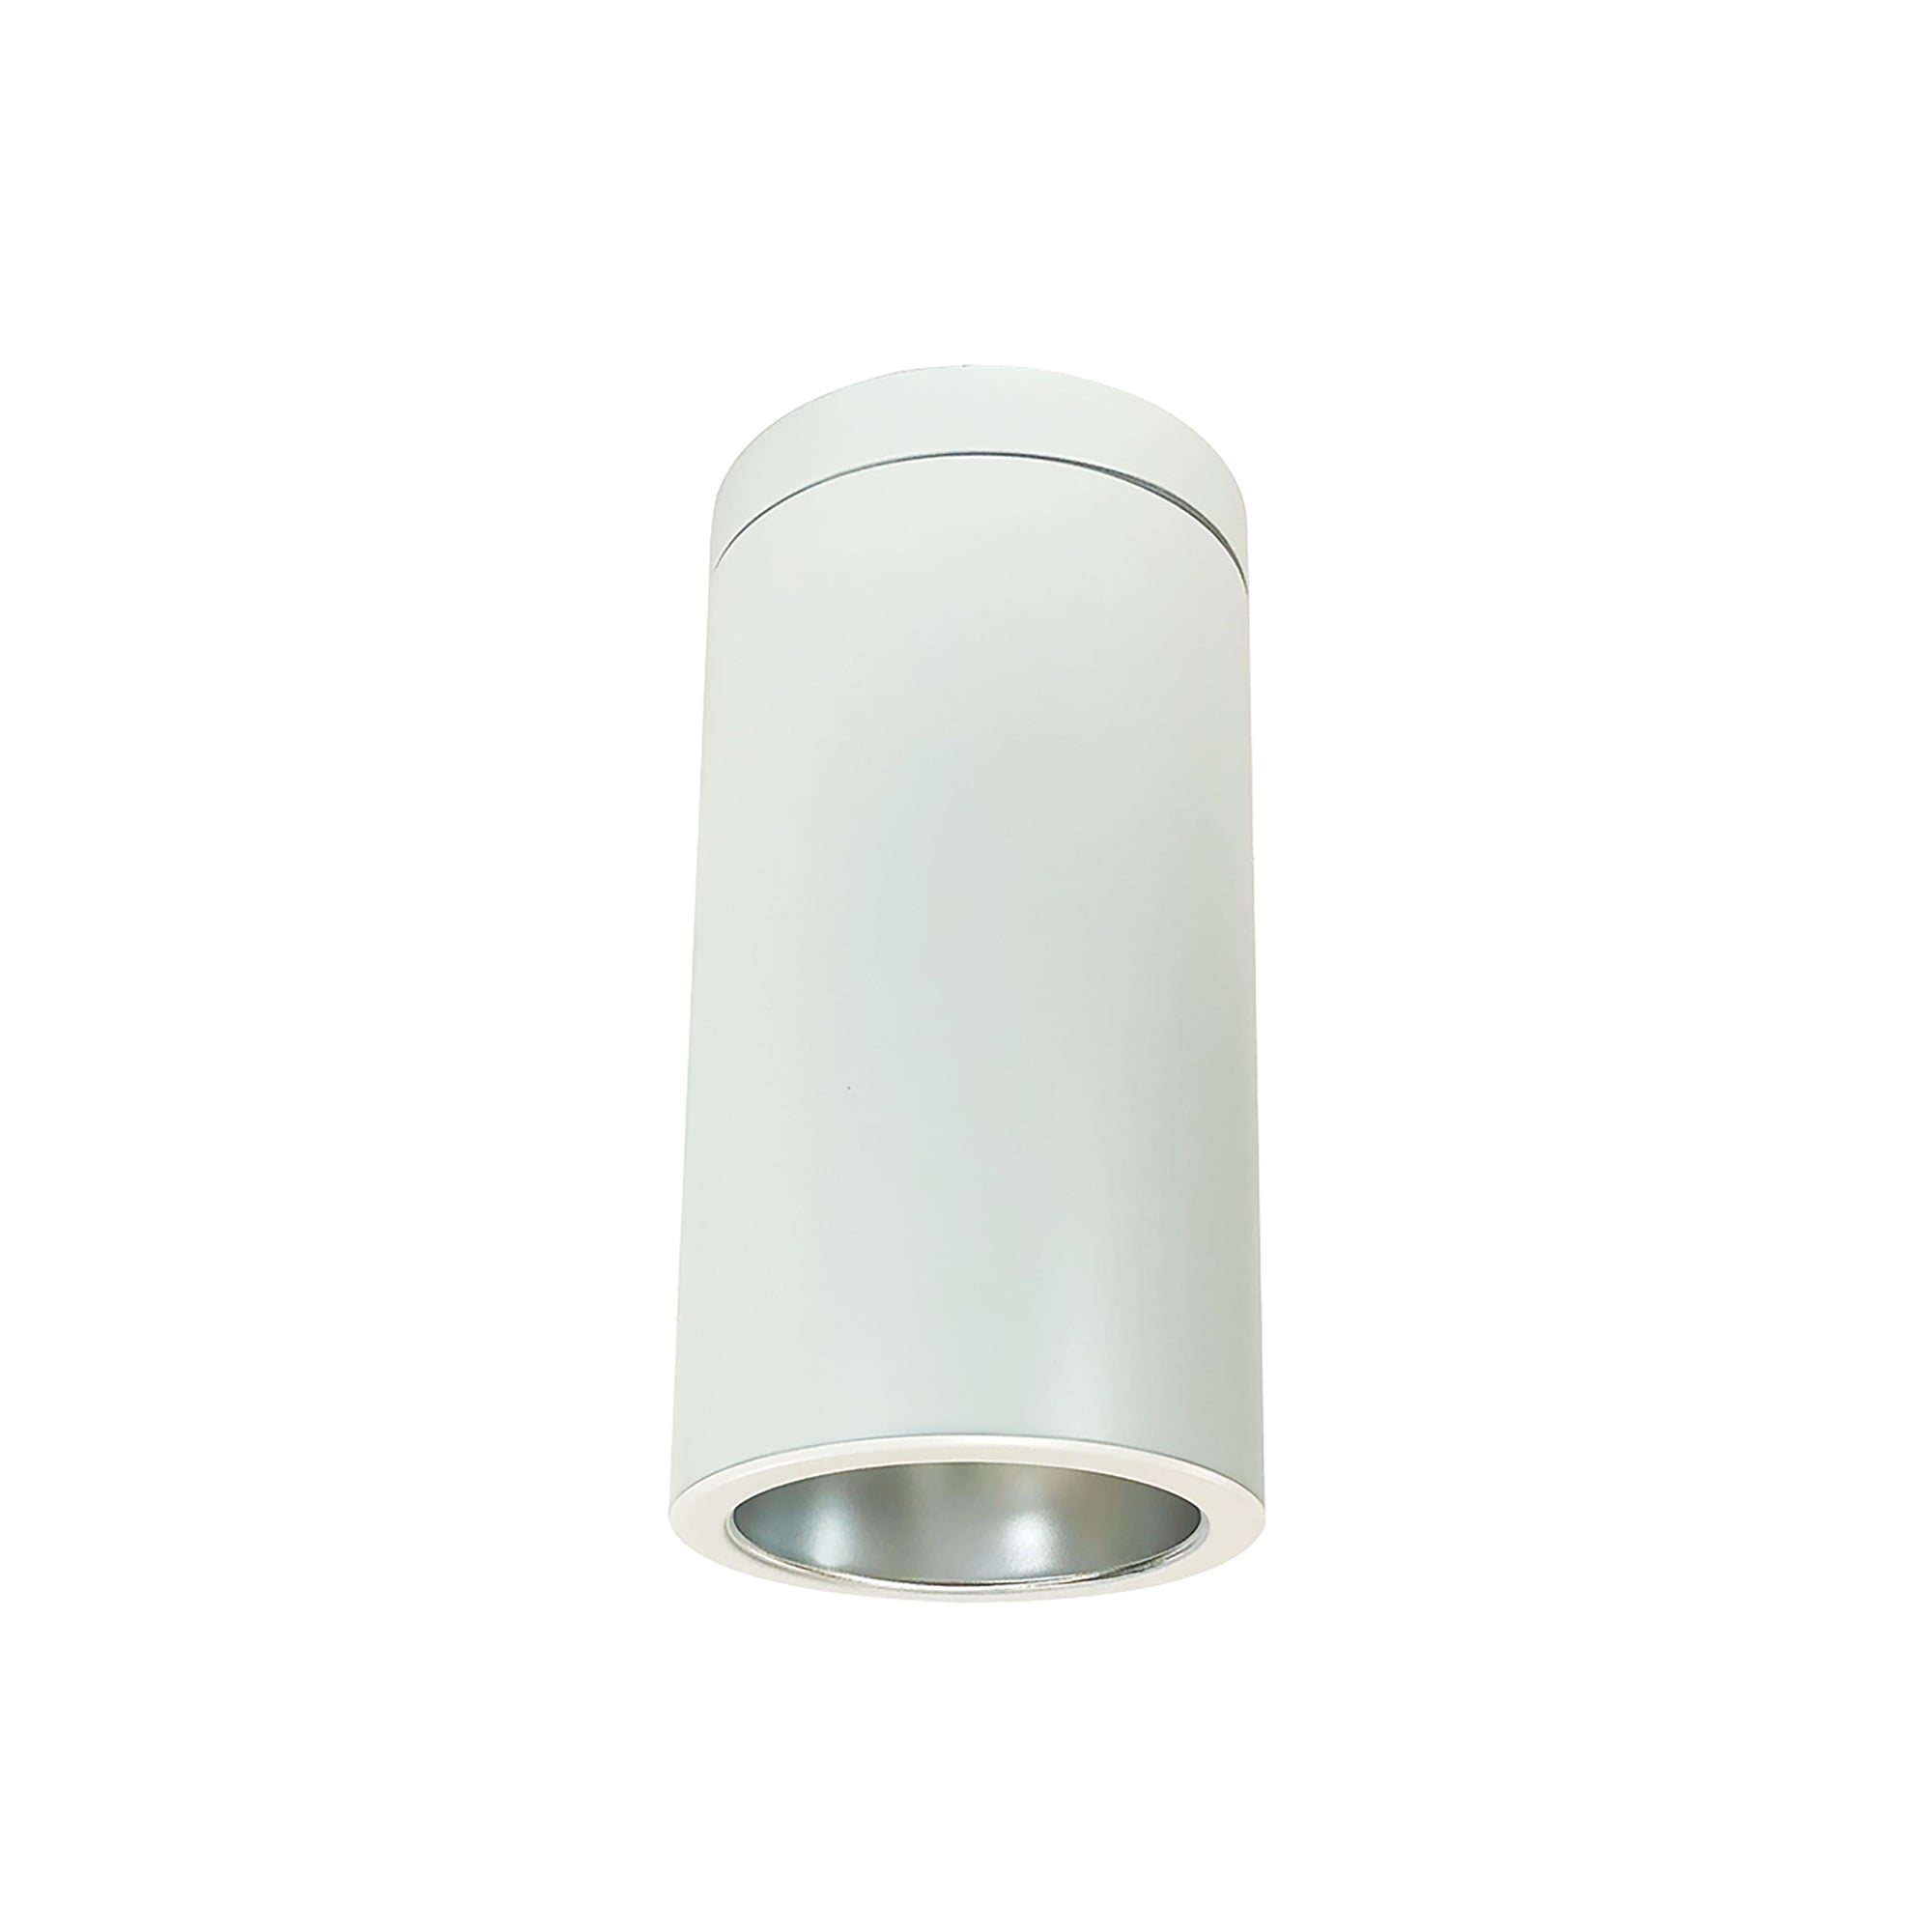 Nora Lighting NYLS2-6S15135MDWW6 - Cylinder - 6 Inch CYL SURFACE 1500LM REF 35K DIFF/WHT WHT CYL 120-277 0-10V